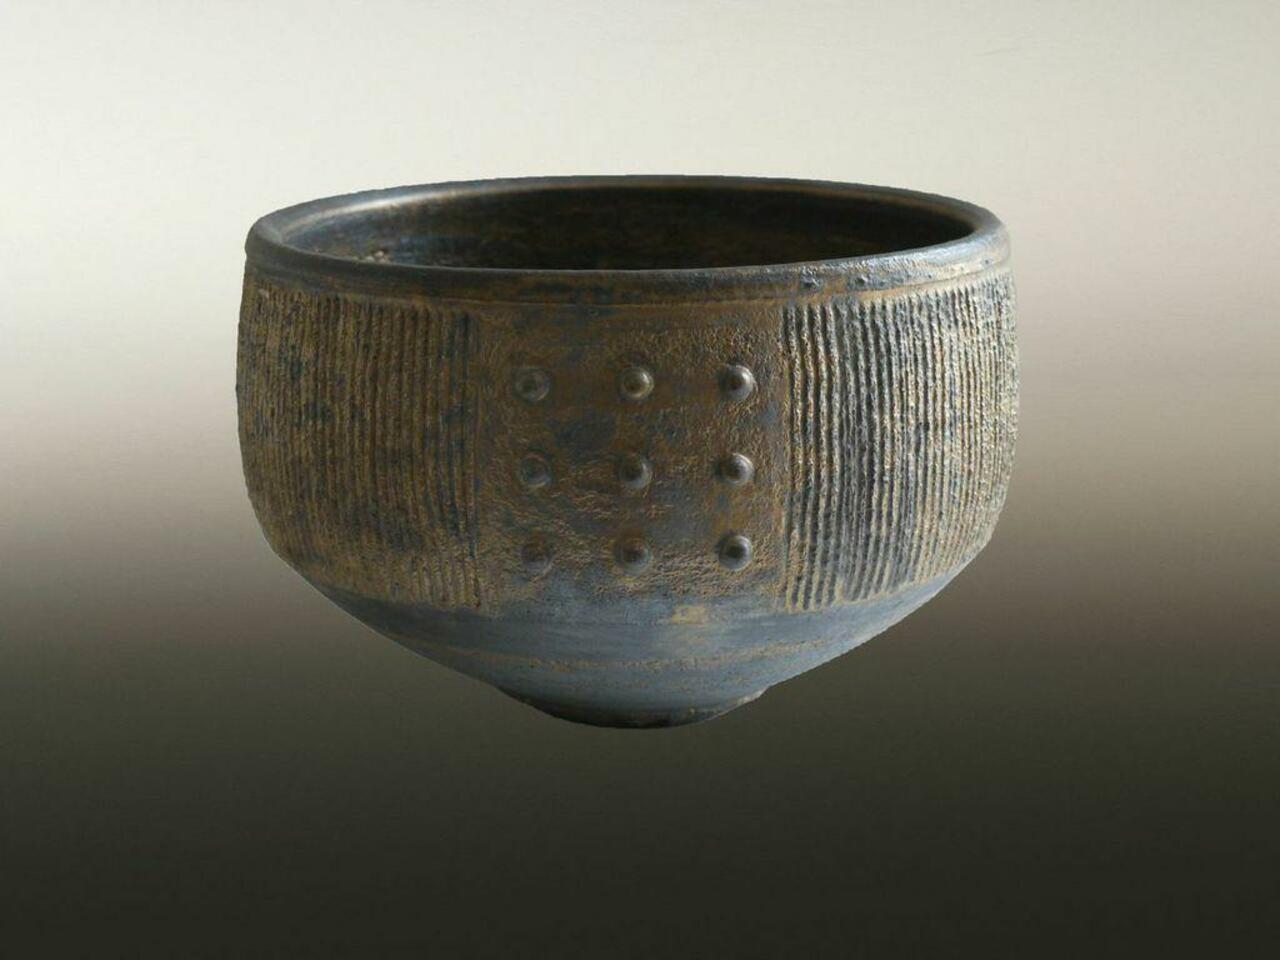 Our current exhibition includes Elsa Taylor #art and Jason Wason #ceramics #cornwall http://t.co/lXF2kMvvay